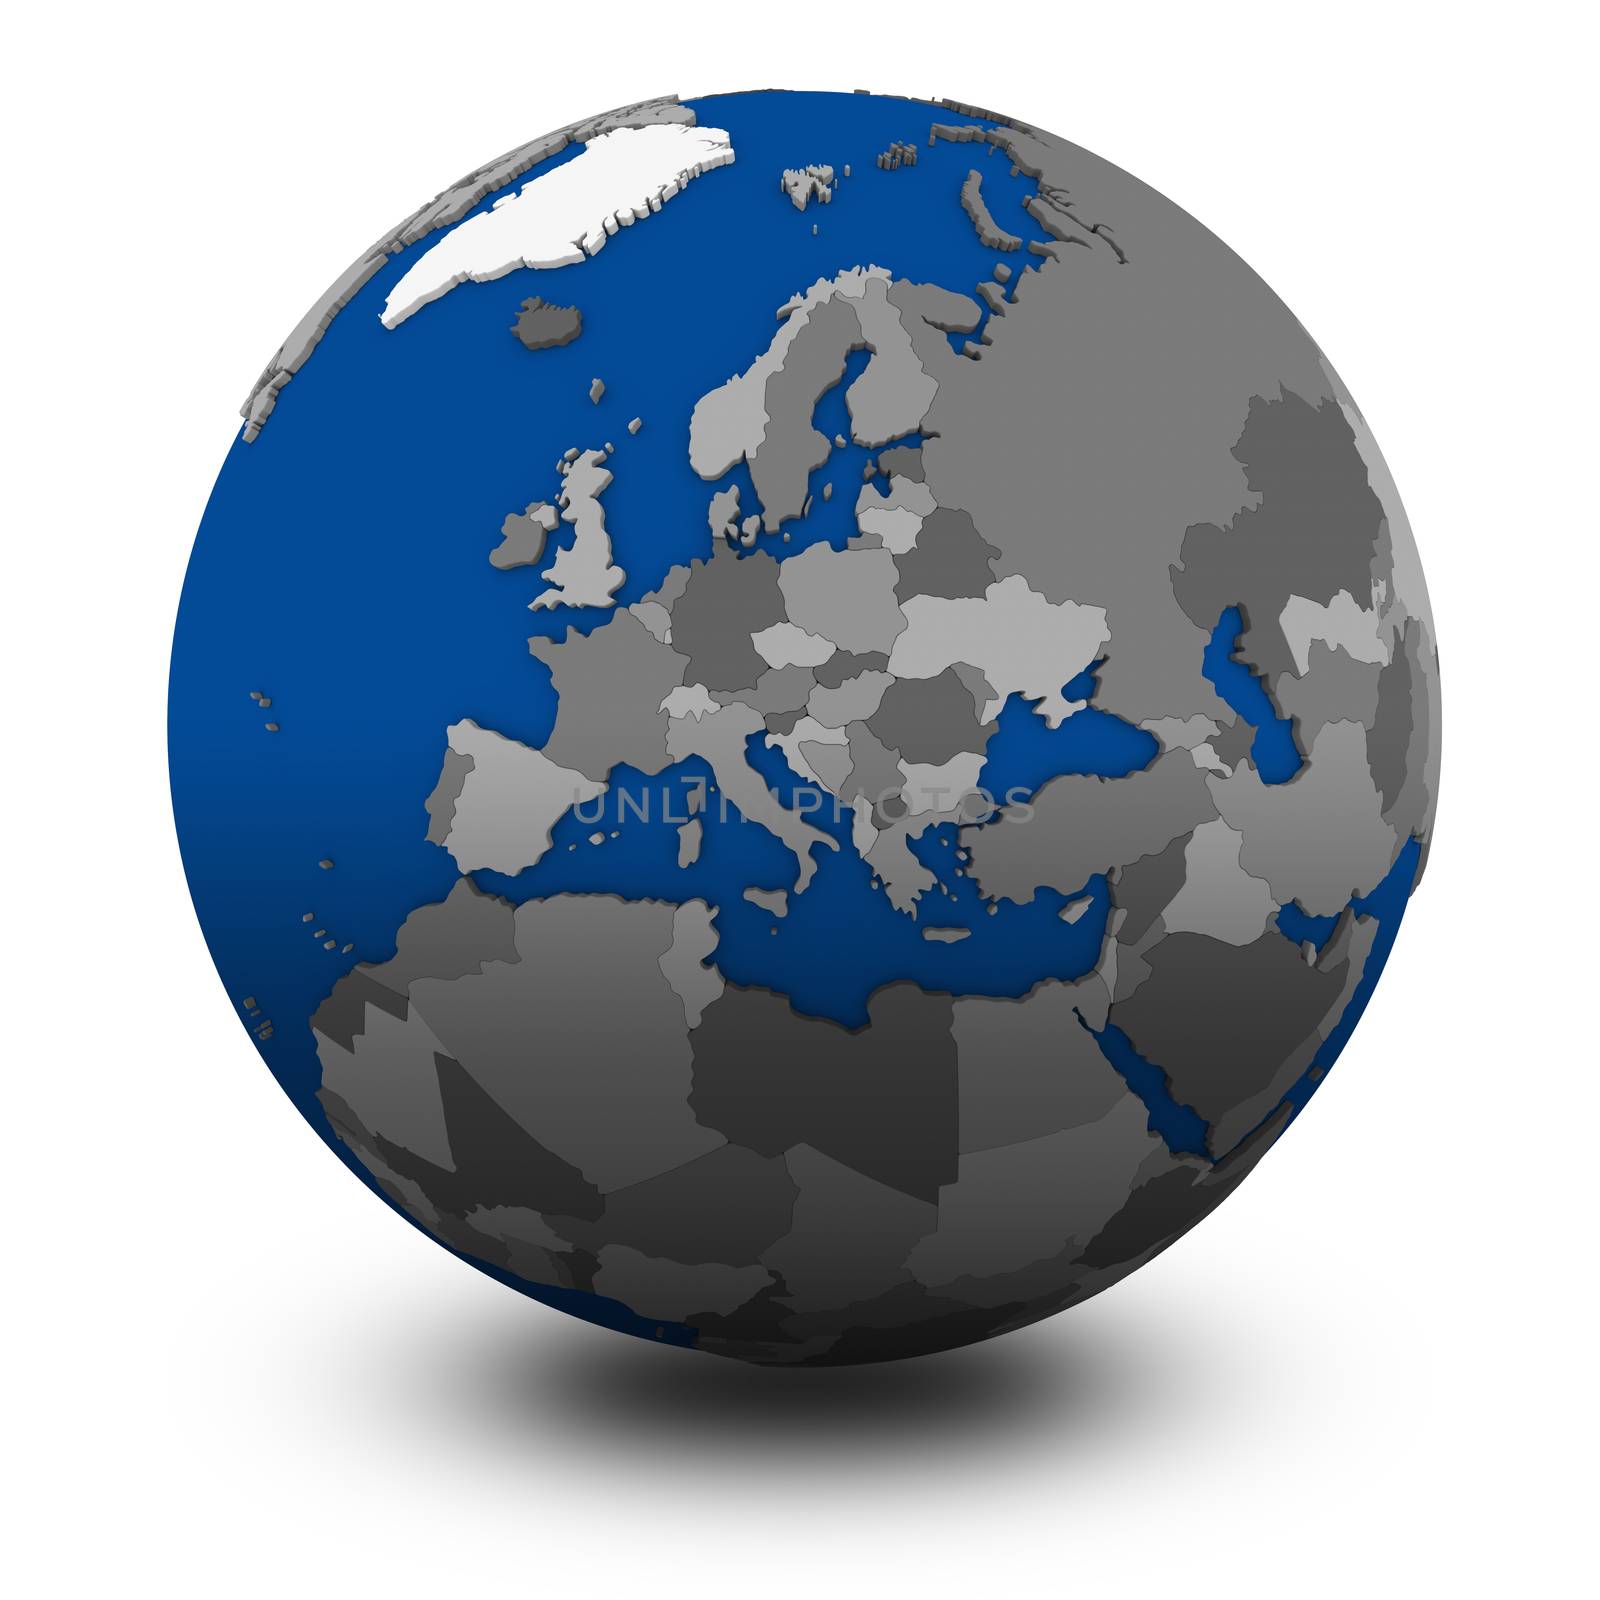 Europe on political globe illustration by Harvepino